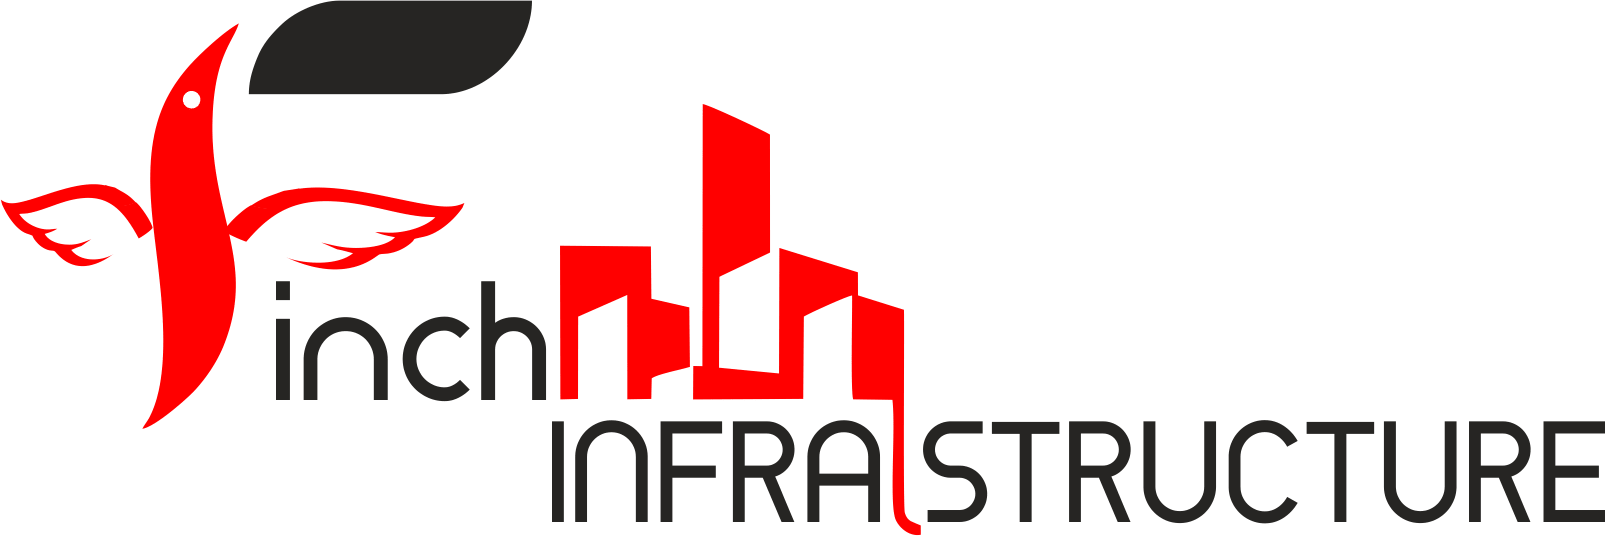 Infrastructure Logo - Finch Infrastructure Services